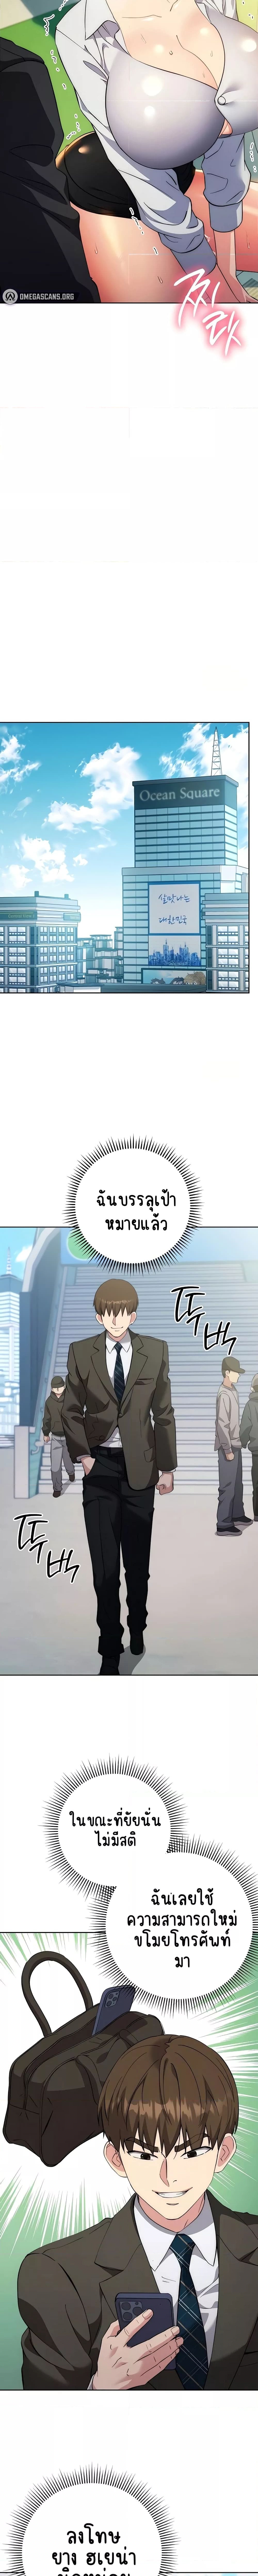 Outsider: The Invisible Man ตอนที่ 10 ภาพ 15